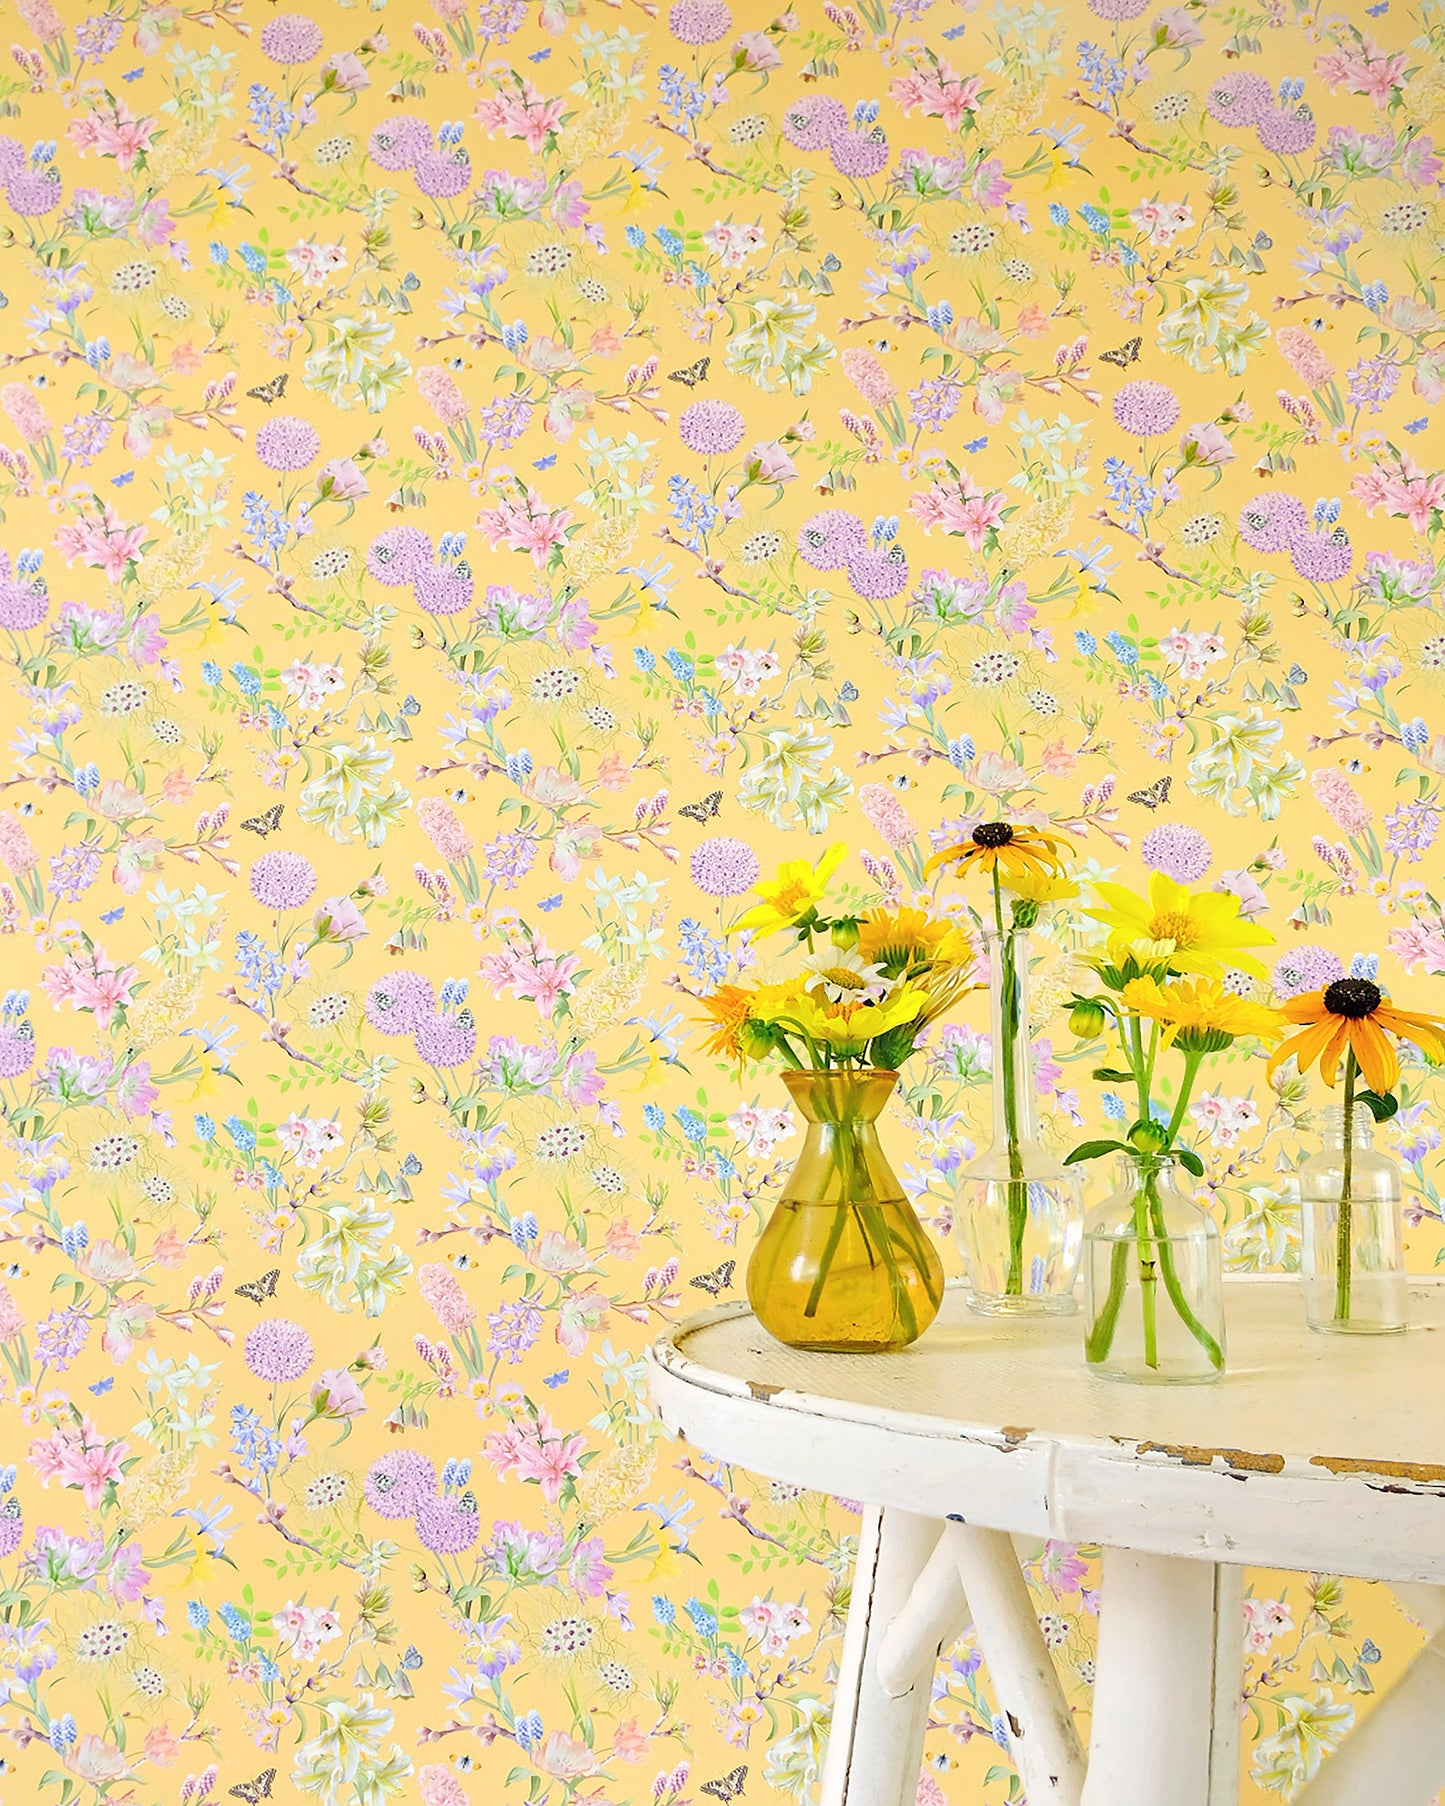 Light yellow designer wall covering with a hand illustrated nature inspired design for modern home decor